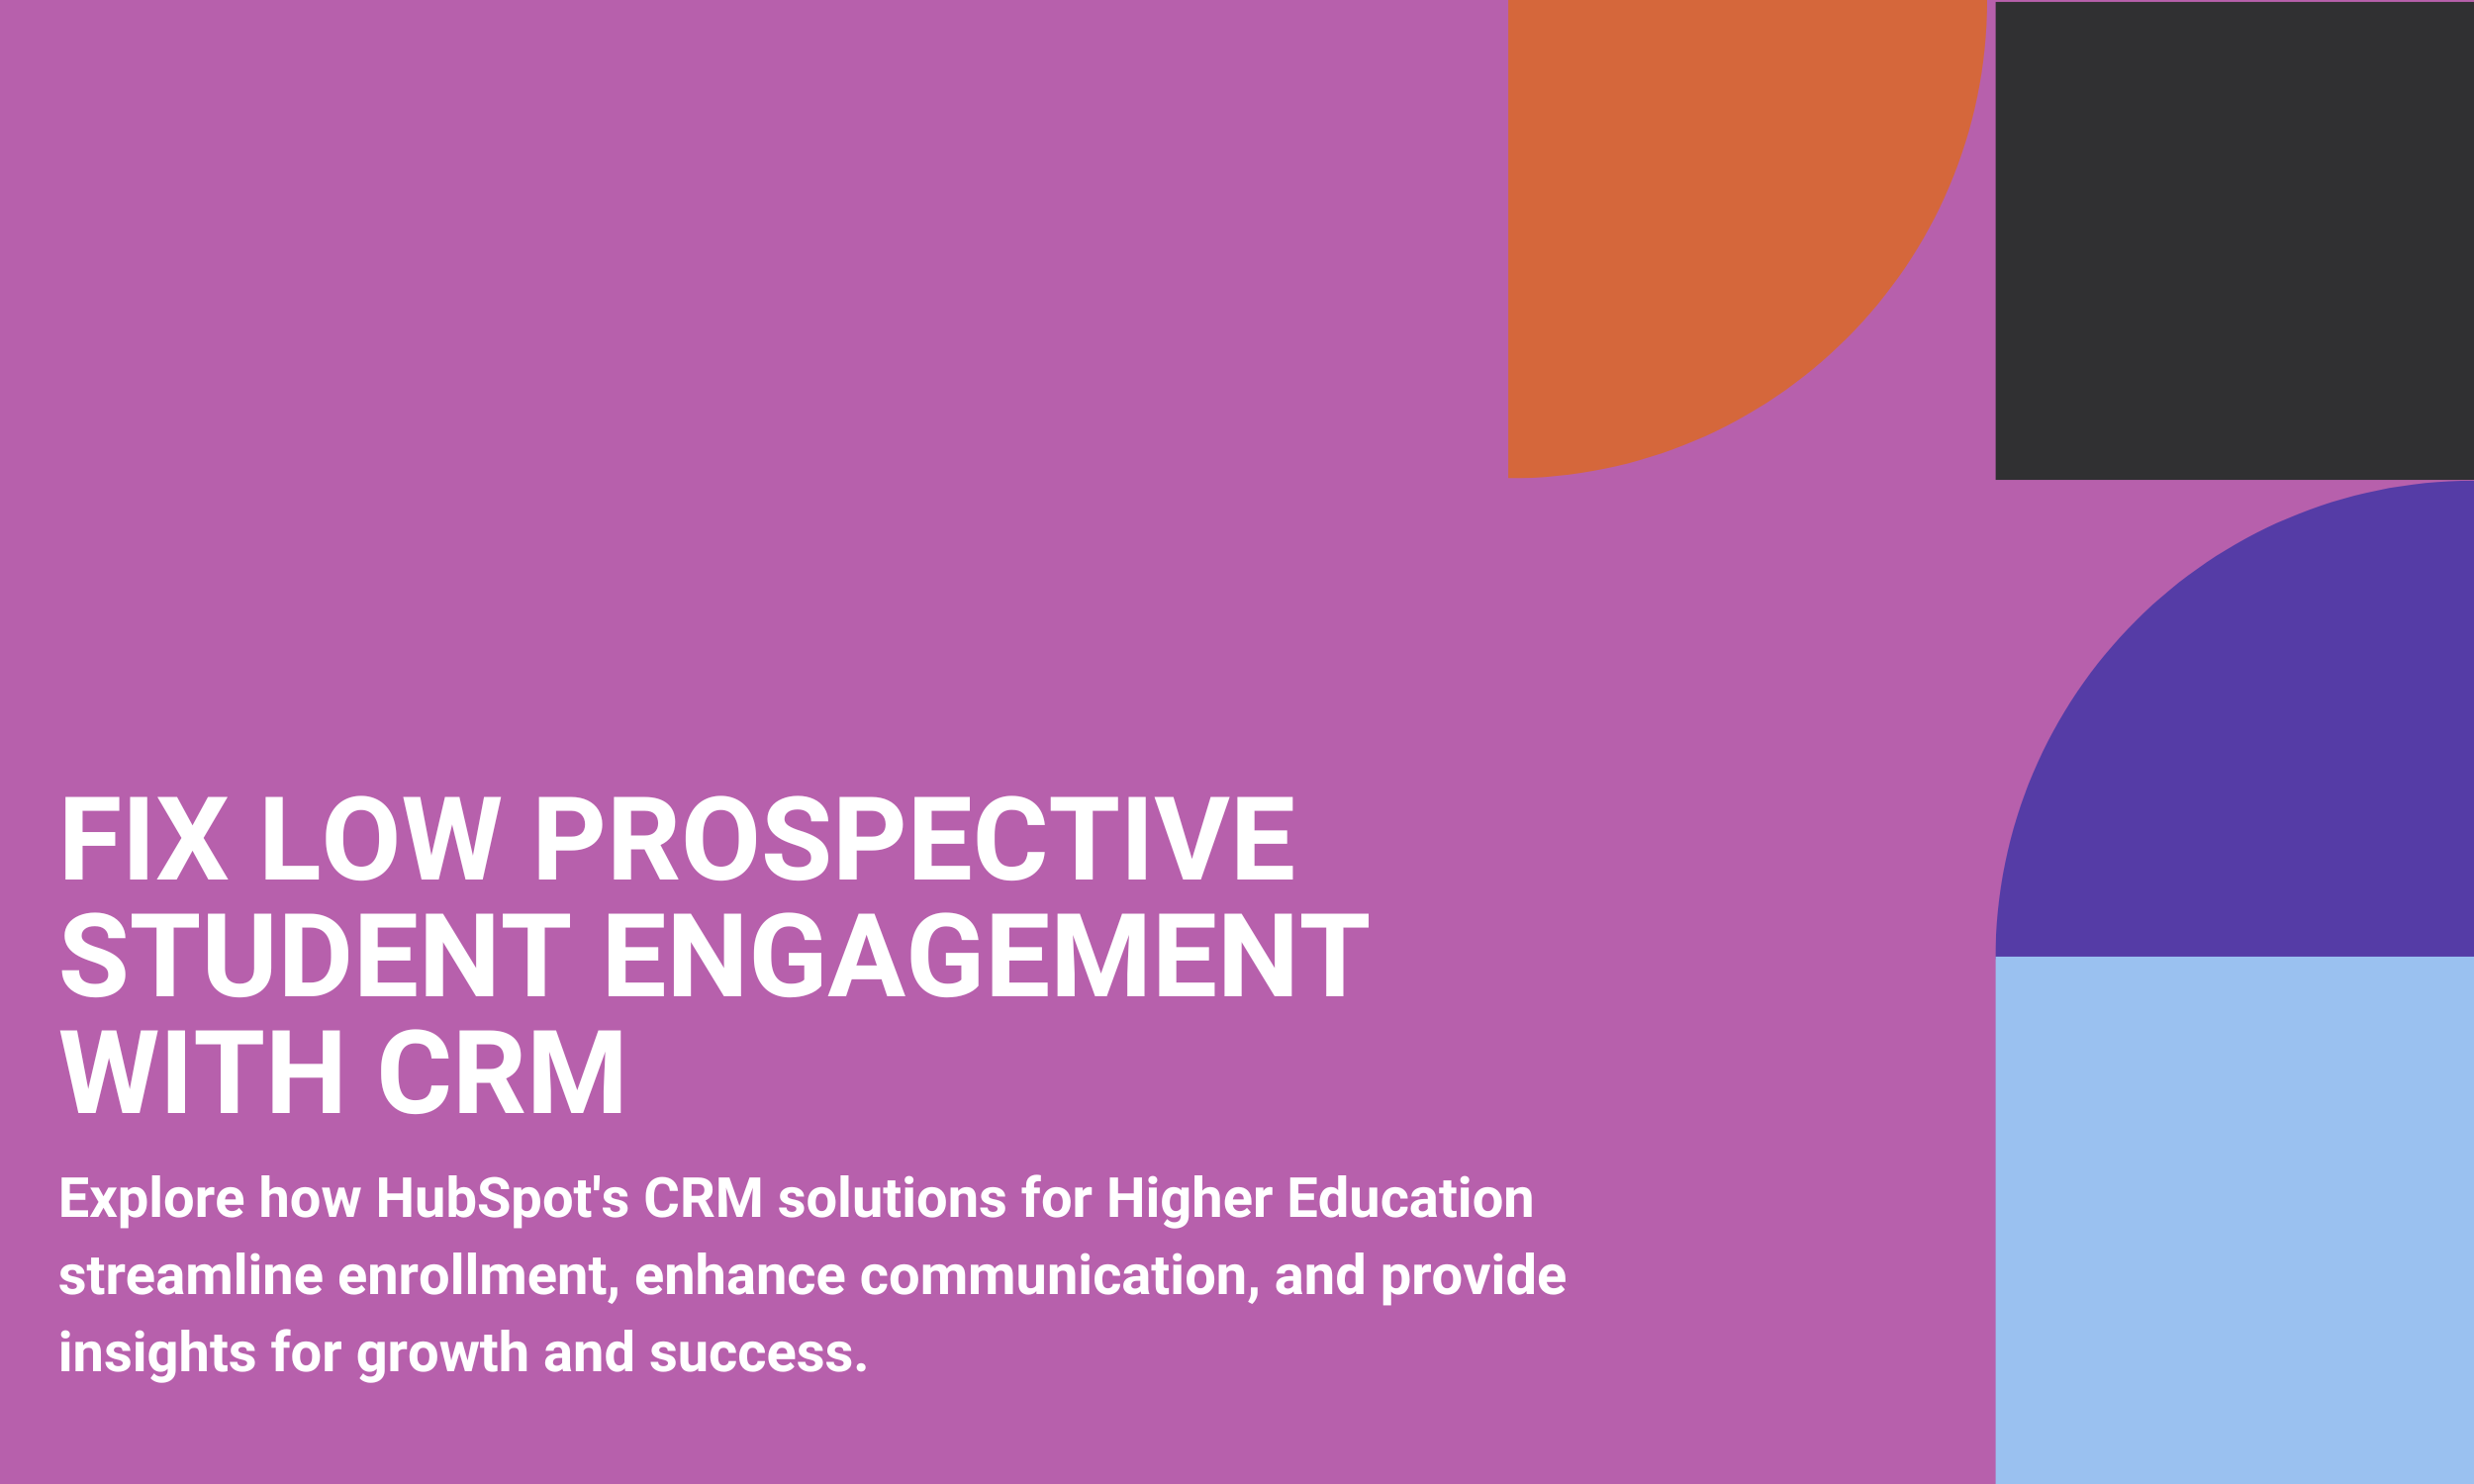 Fix Low Prospective Student Engagement With CRM